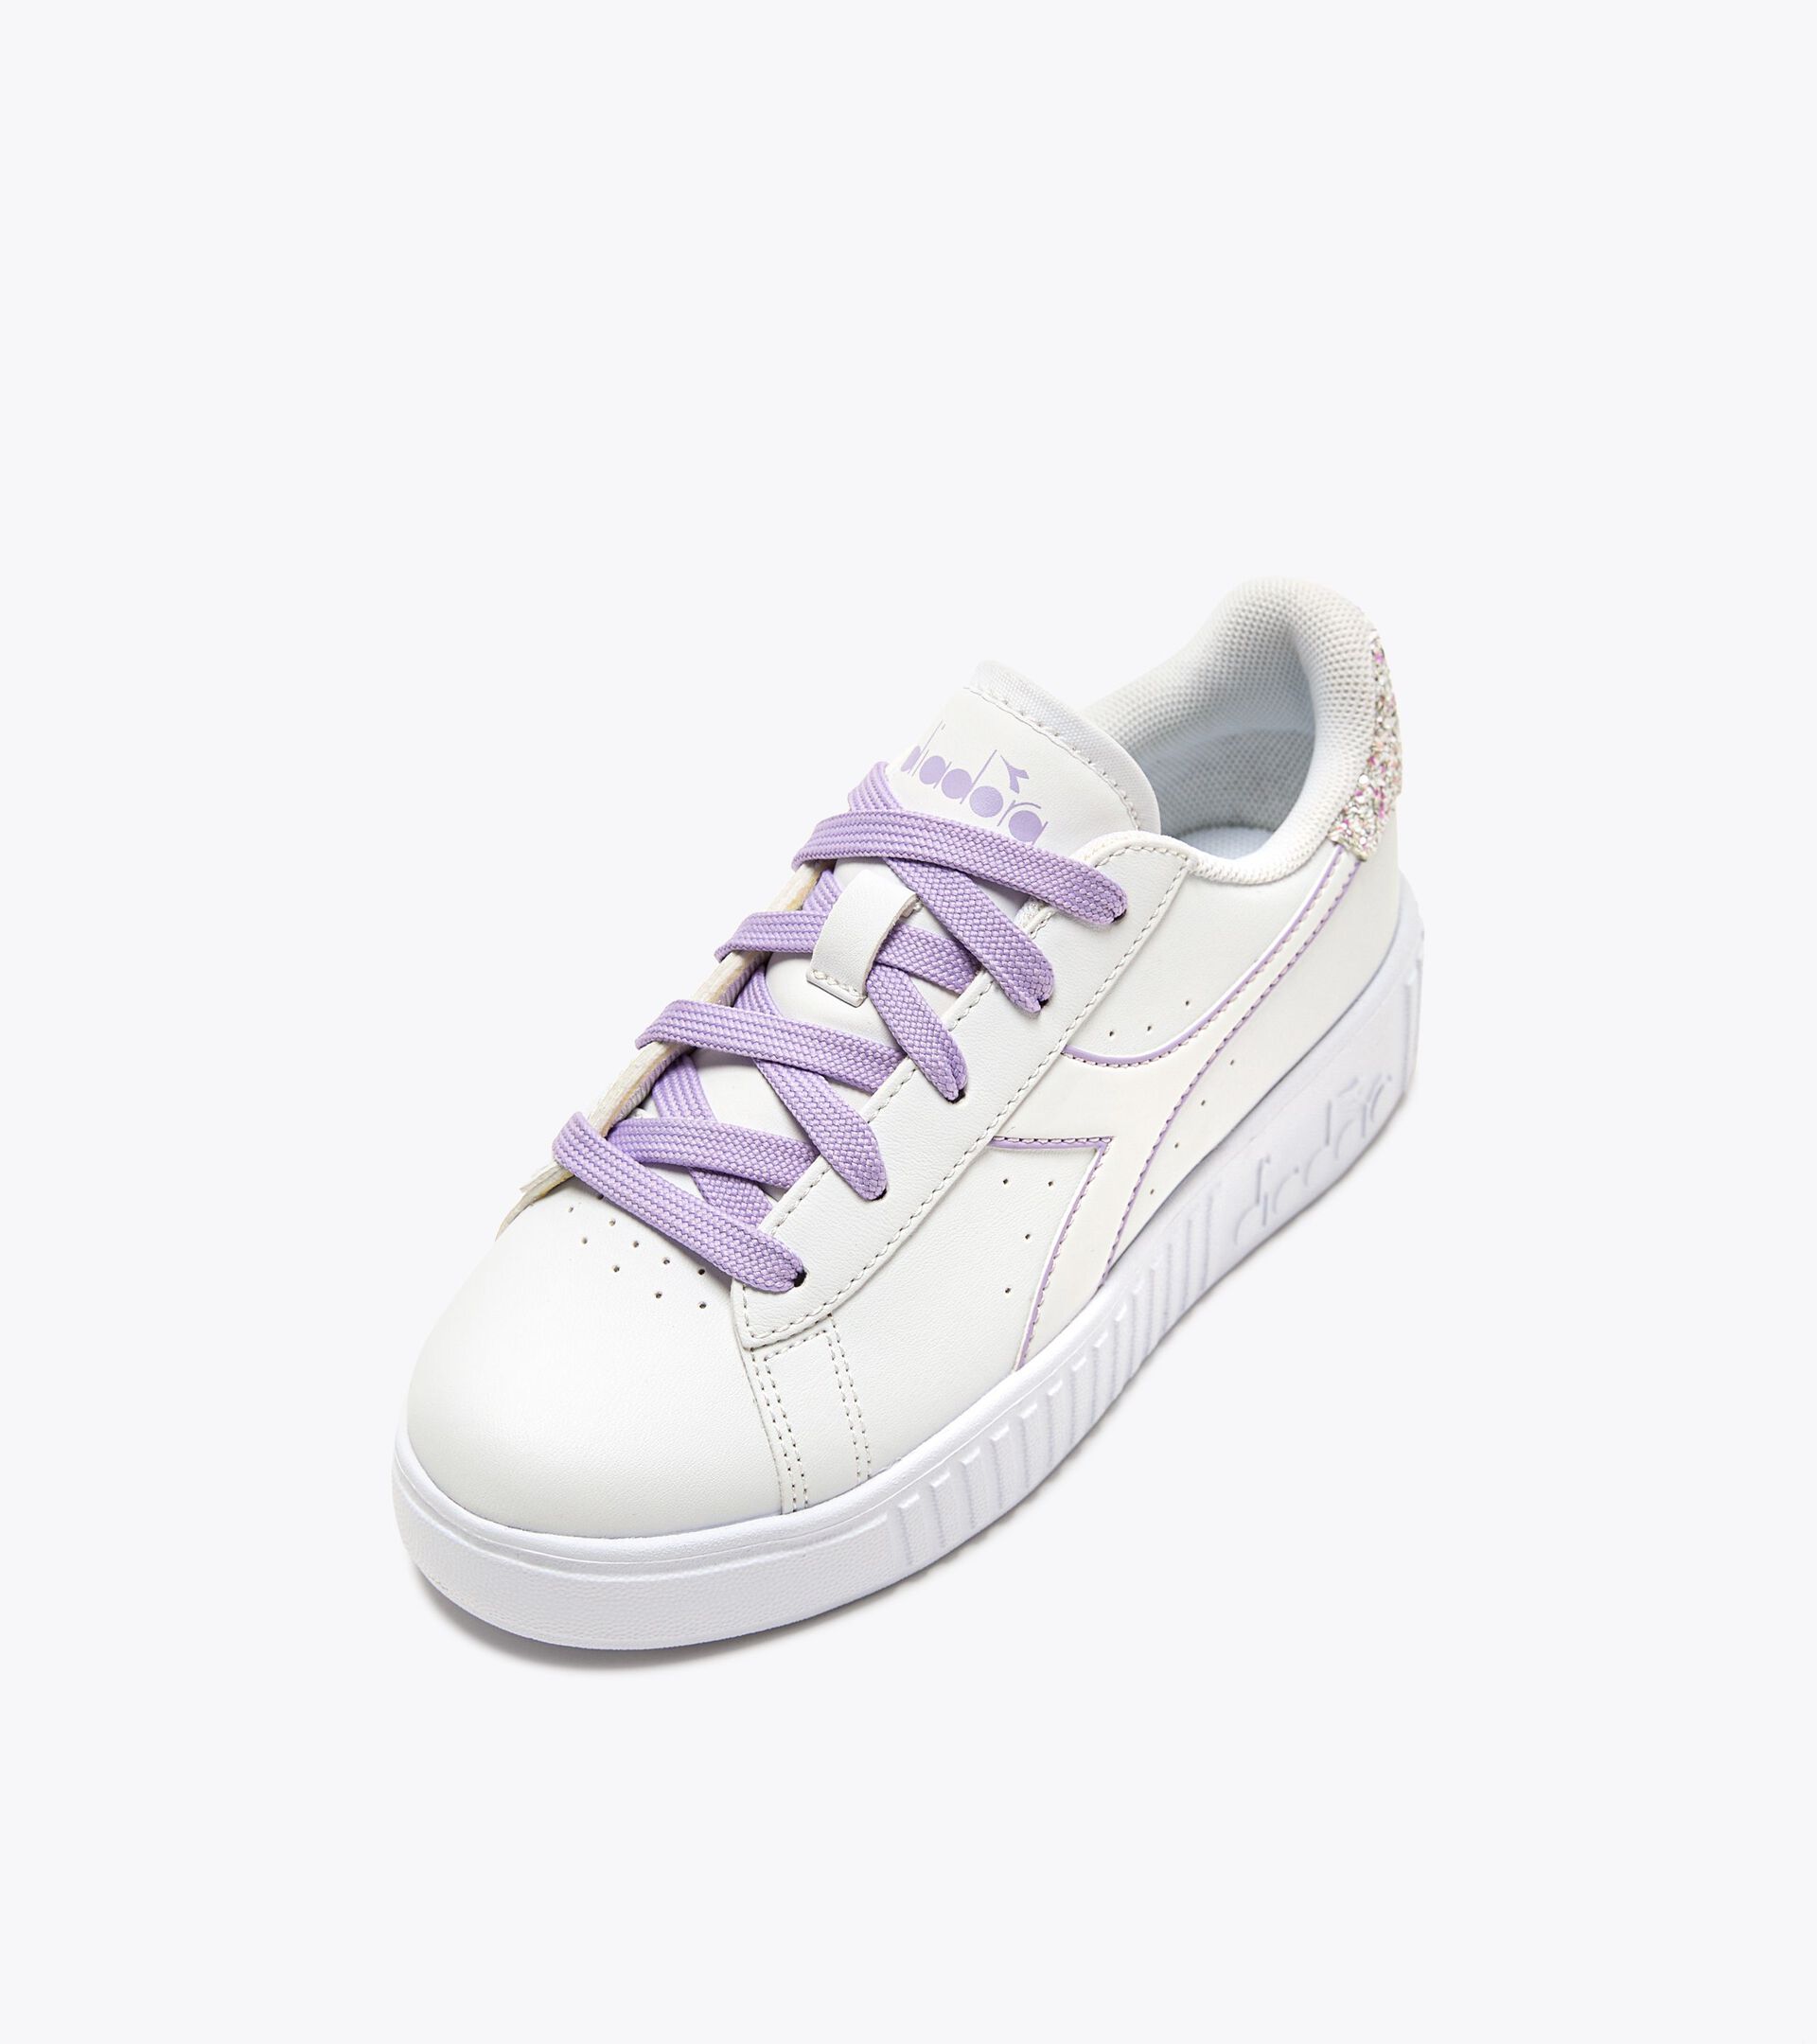 Sports shoes - Kids 4-8 years GAME STEP P SPARKLY PS PURPLE ROSE - Diadora